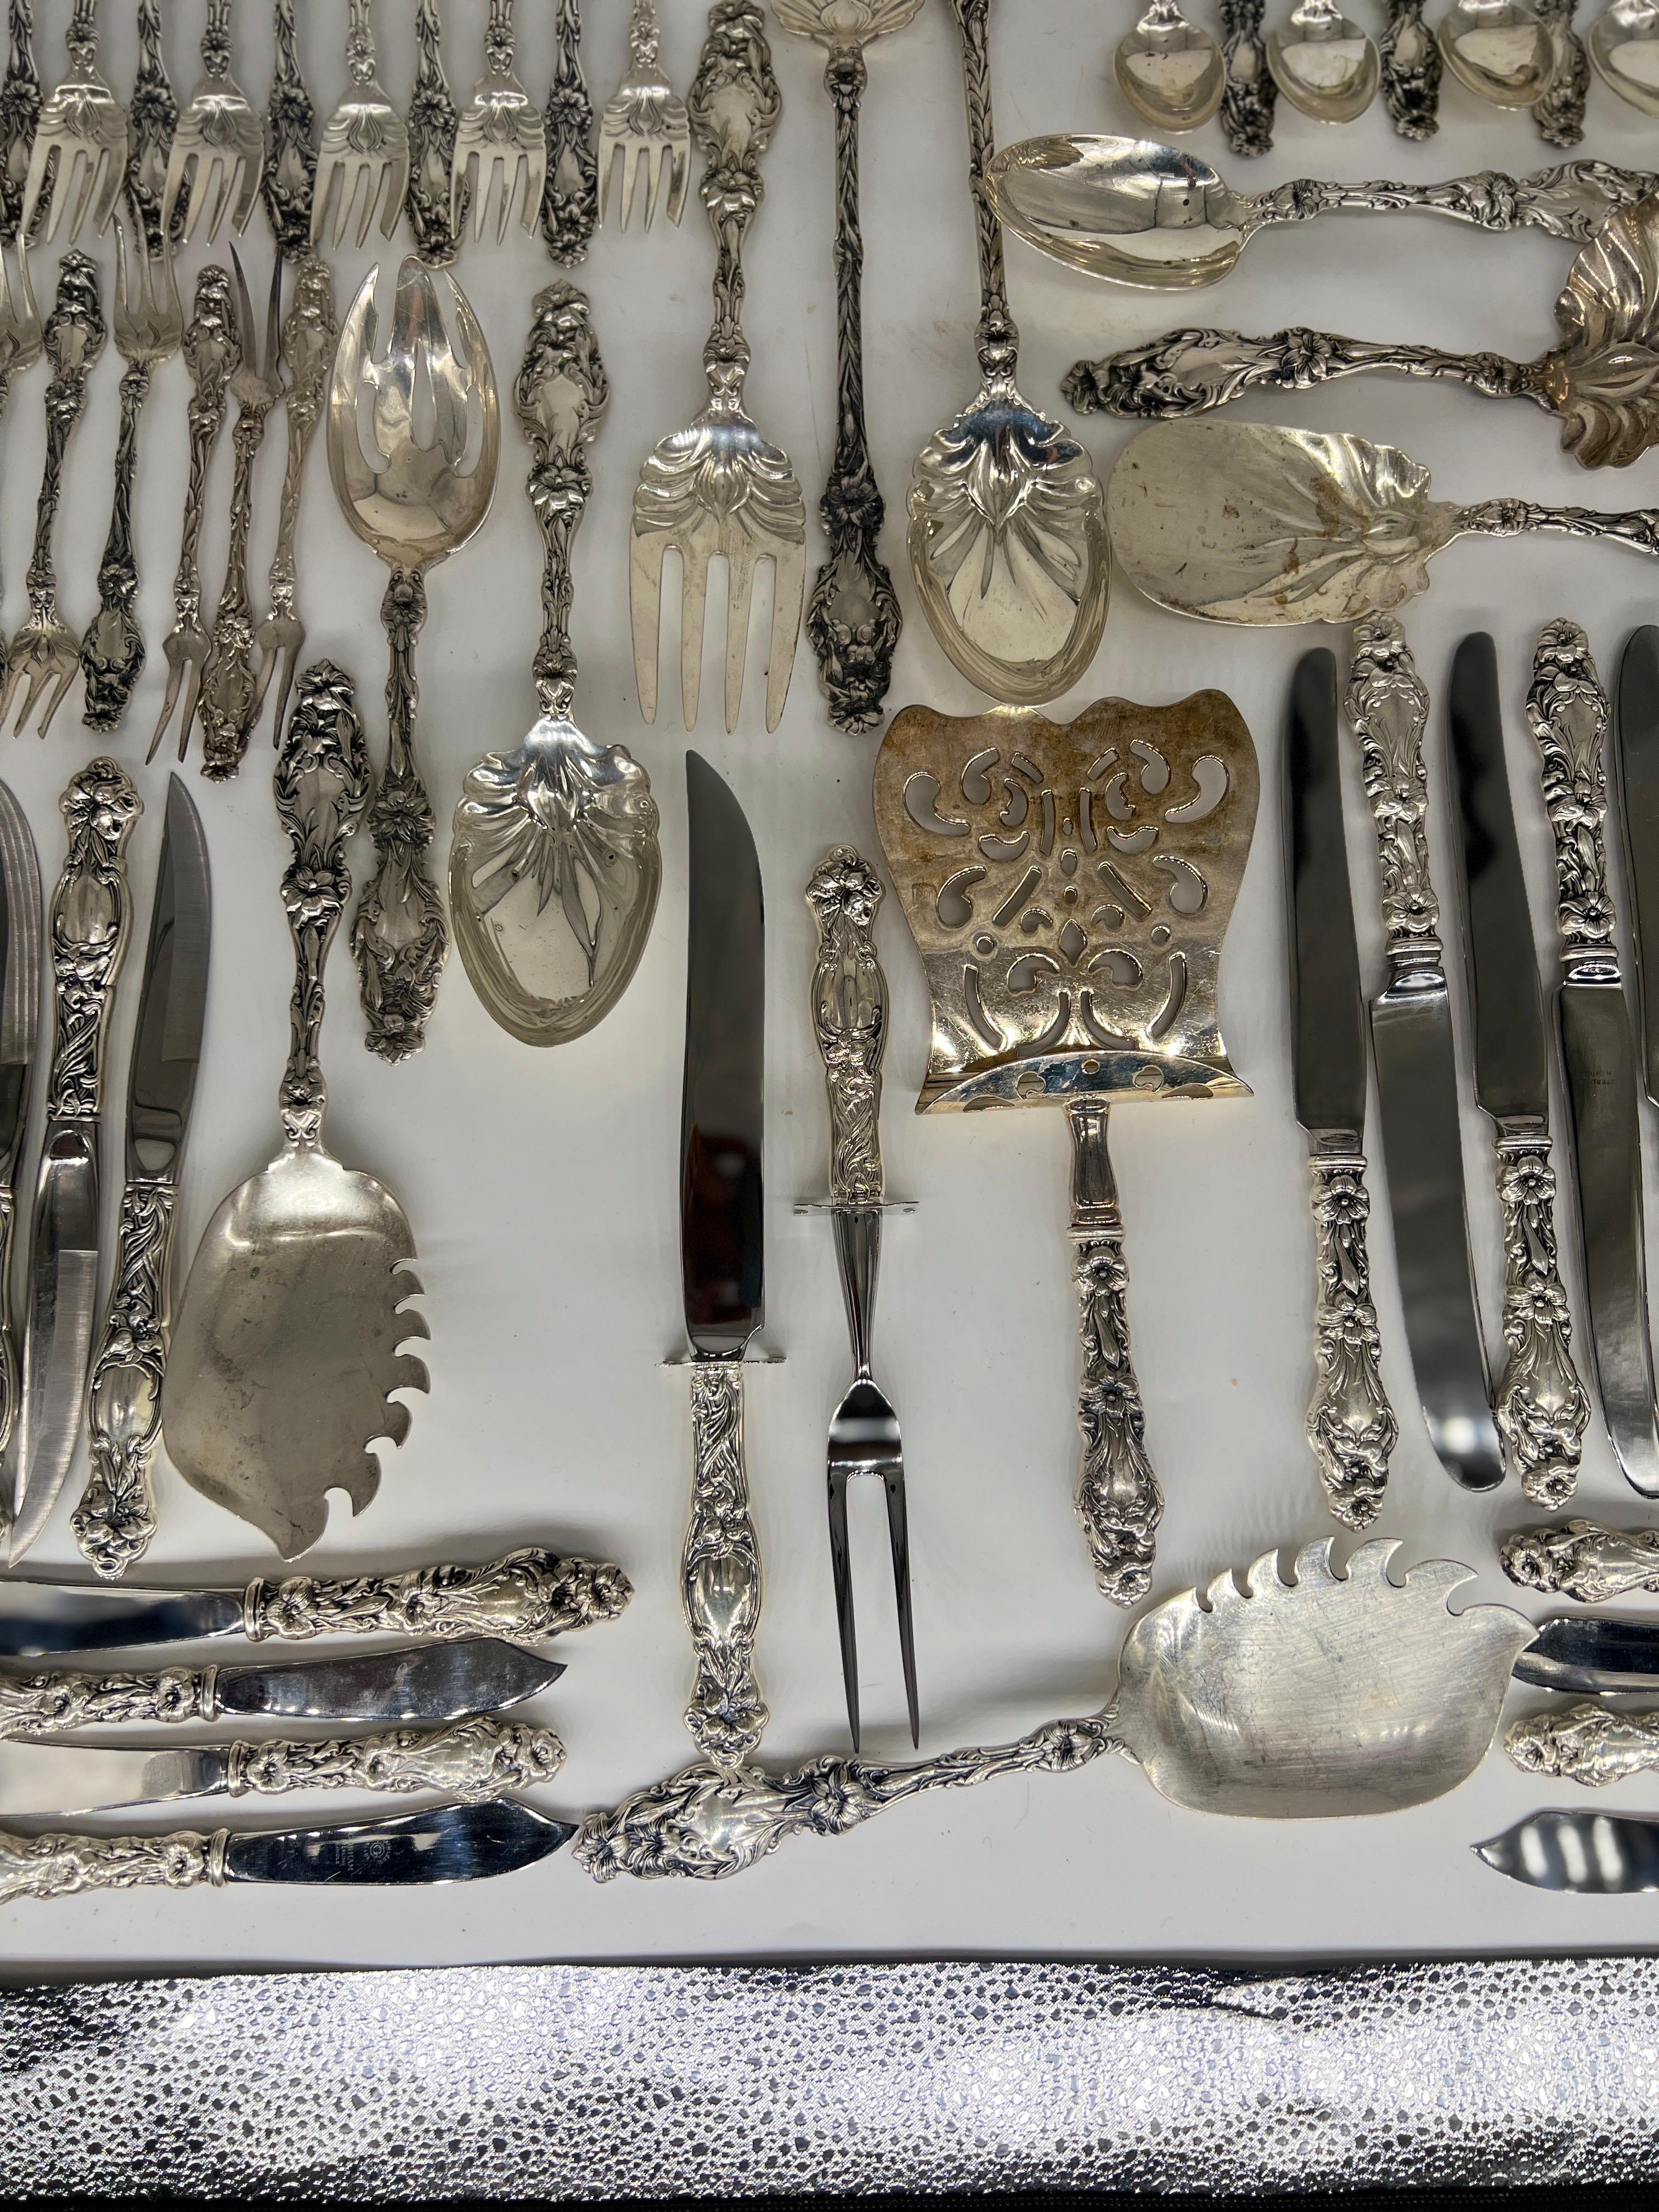 161 Pc, “Lily” Whiting Sterling Silver Flatware Service 5 Place Setting for 18 In Good Condition For Sale In Atlanta, GA